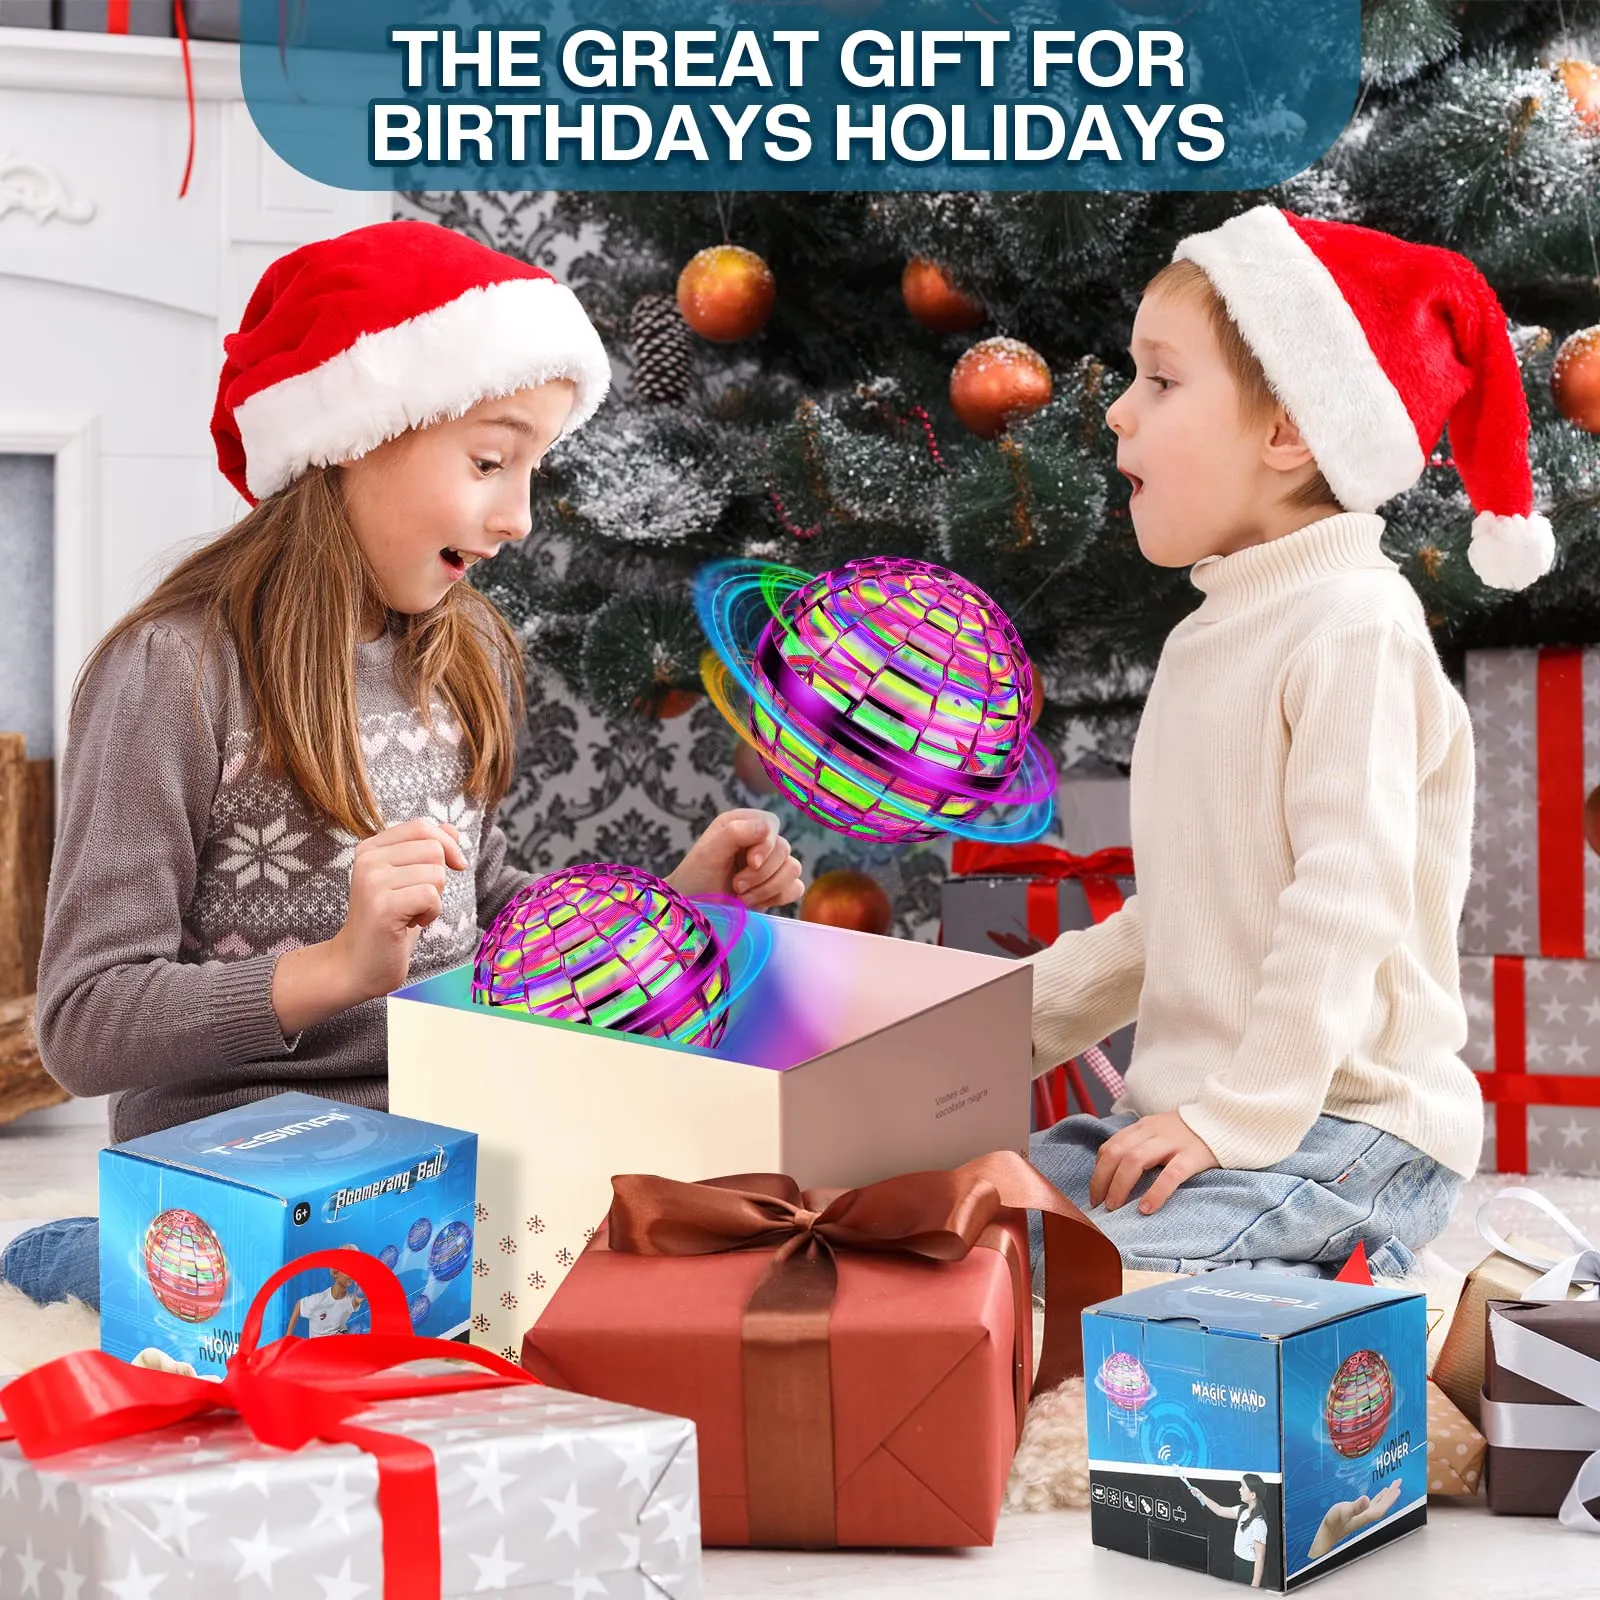 flying orb ball 2022 upgraded flying hover ball toy for kids magic nebula orb 361ﾰ rotating soaring ufo drone rechargeable boomerang flying toy list for childrens day outdoor indoor